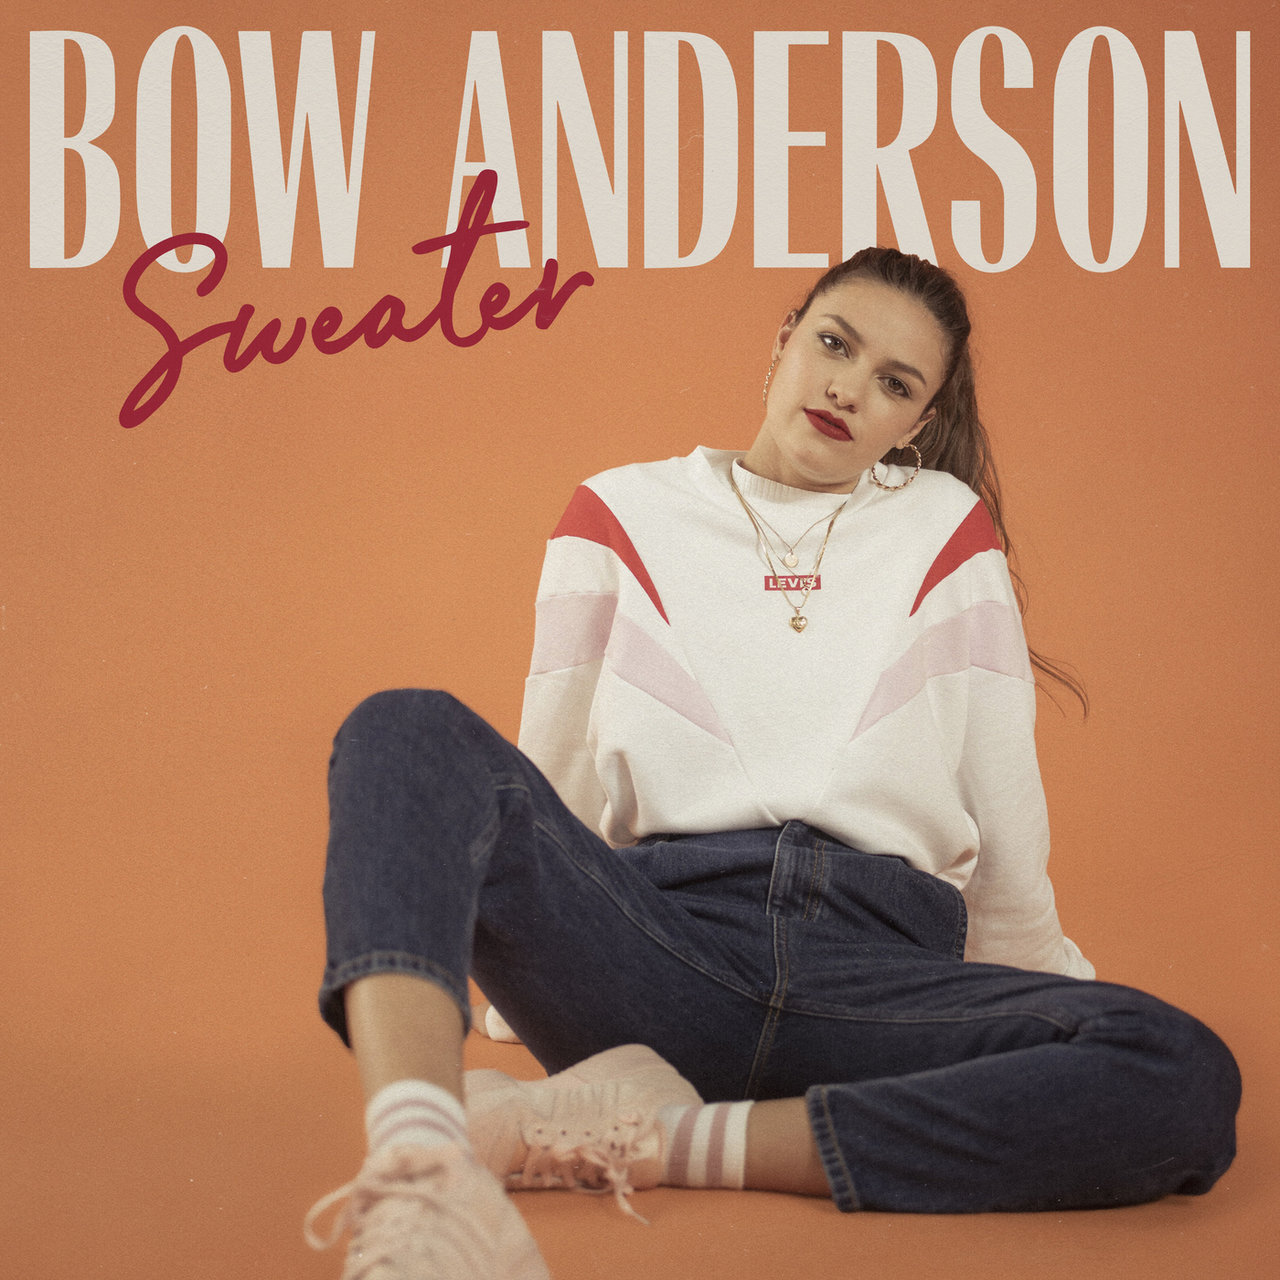 Bow Anderson — Sweater (M-22 Remix) cover artwork